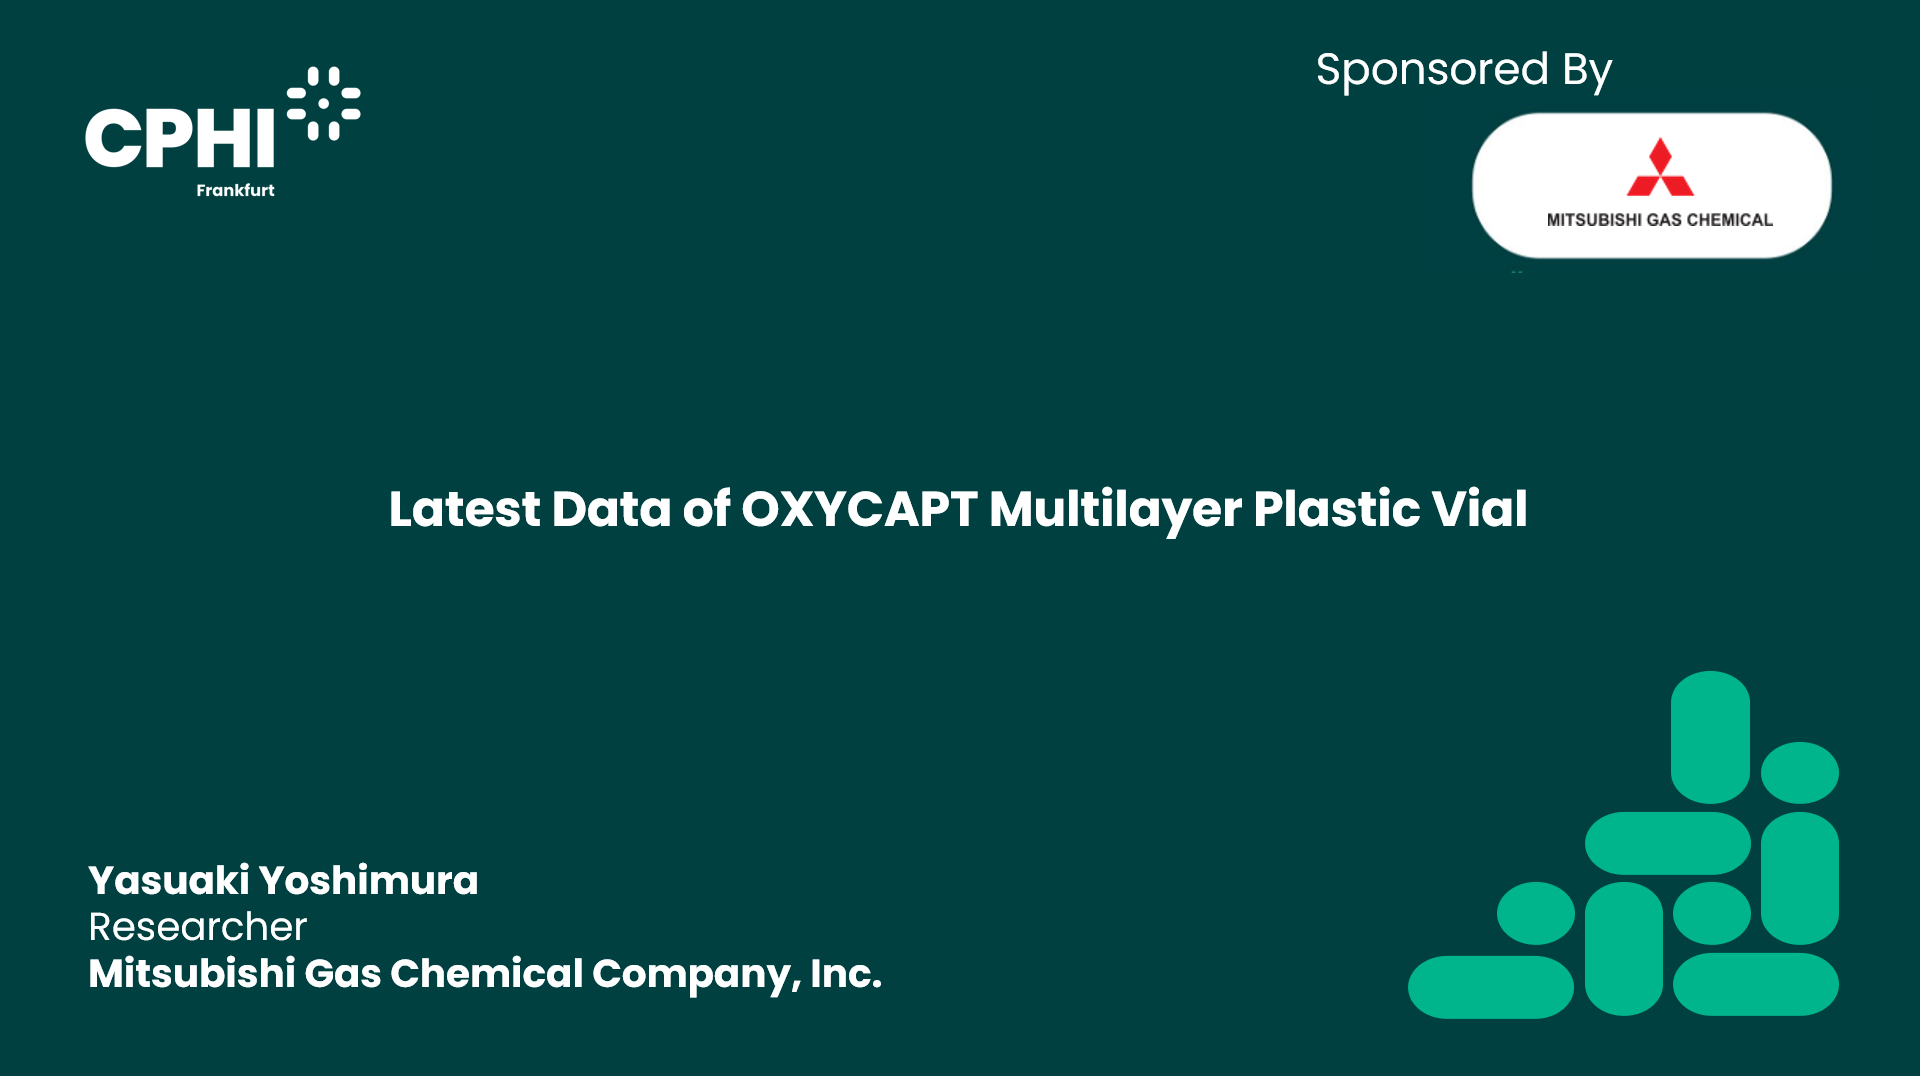 Latest Data of OXYCAPT Multilayer Plastic Vial